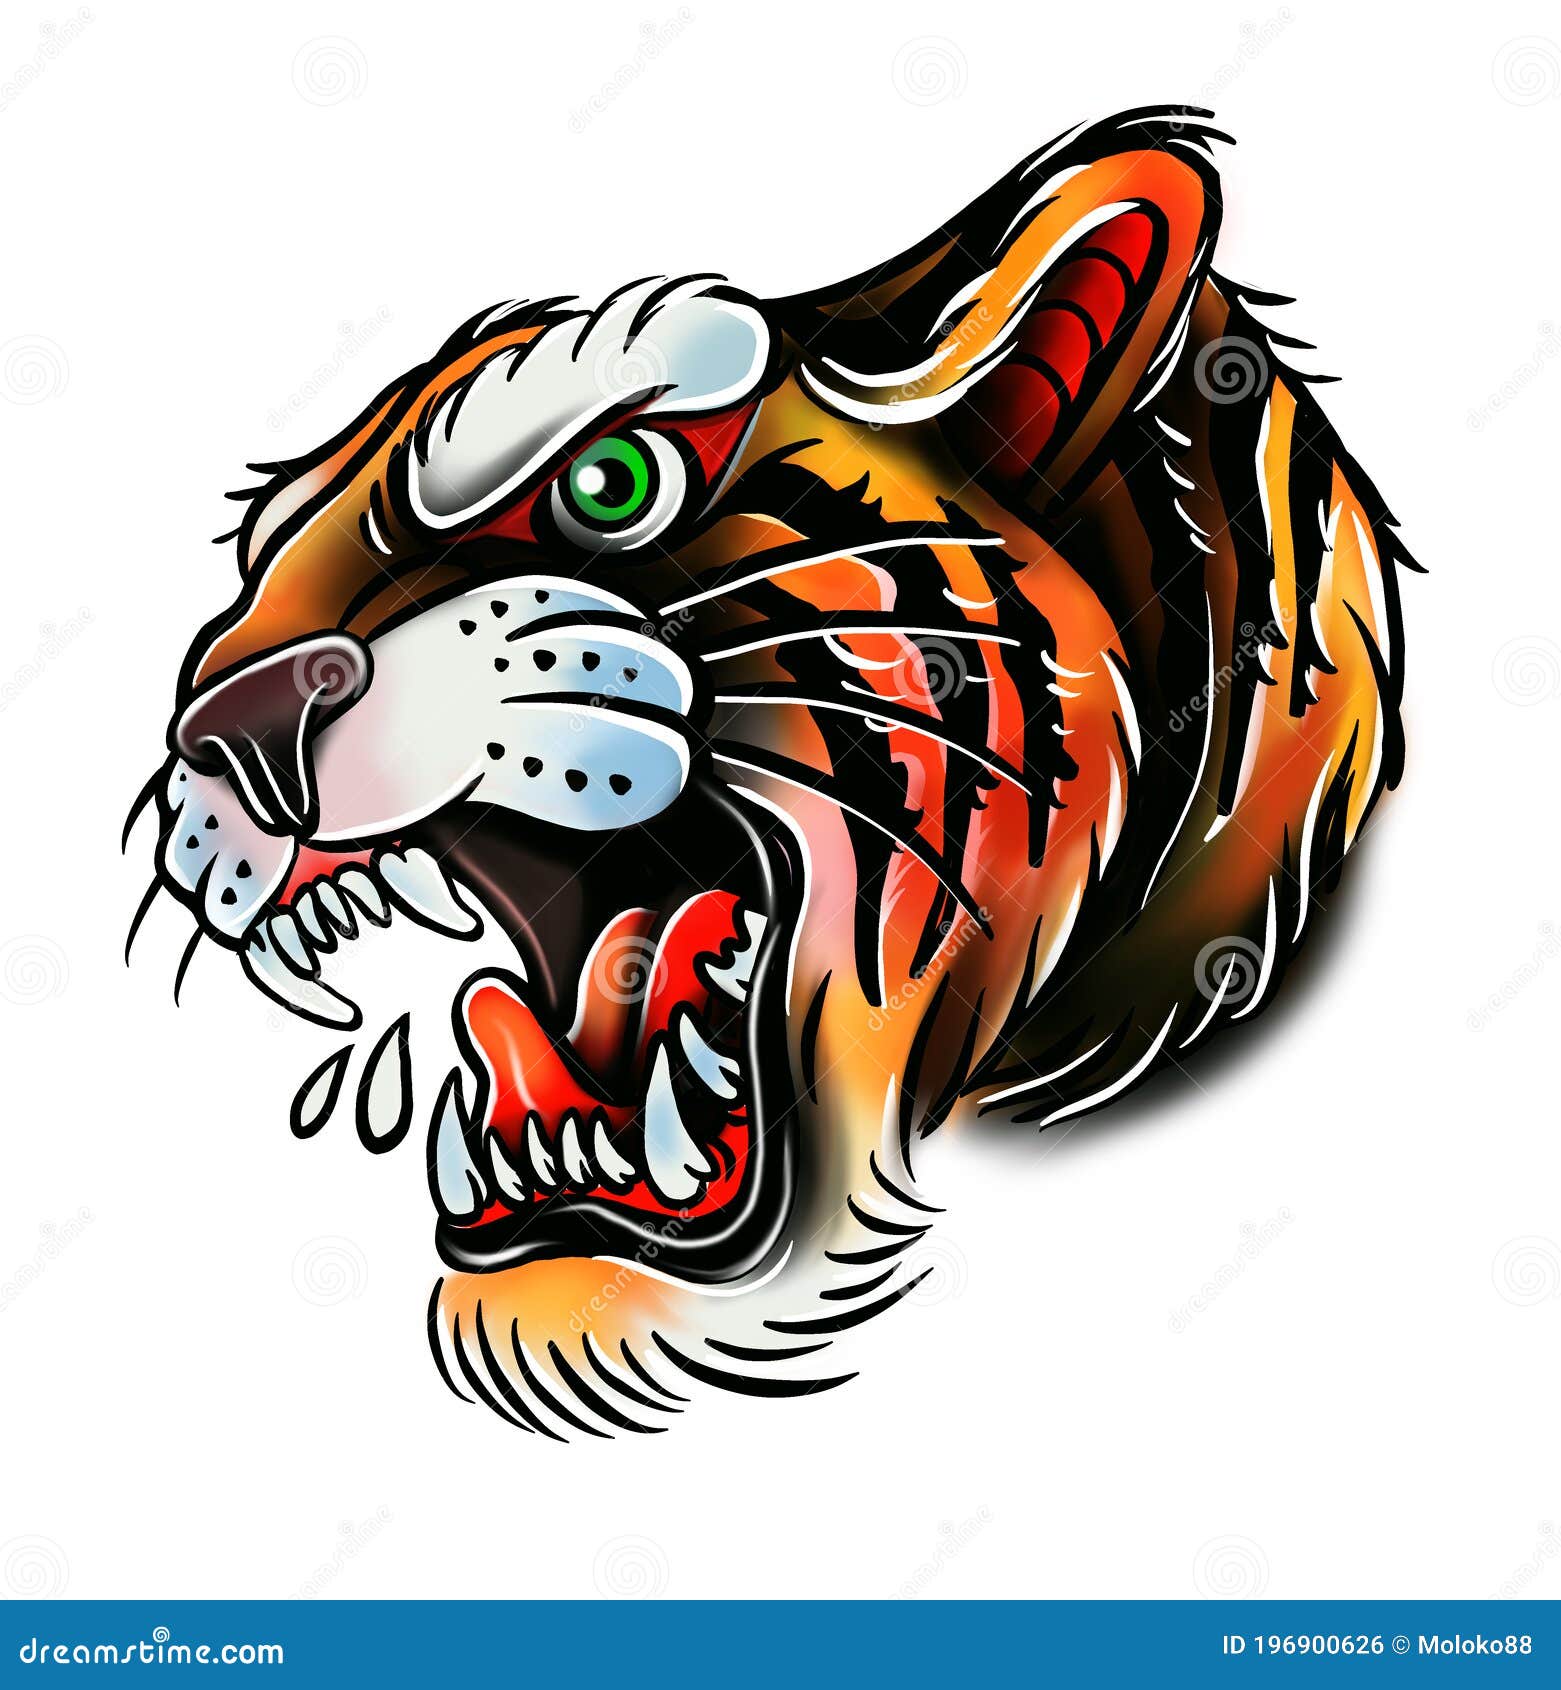 Tiger Tattoo Ideas and Their Meanings  CUSTOM TATTOO DESIGN